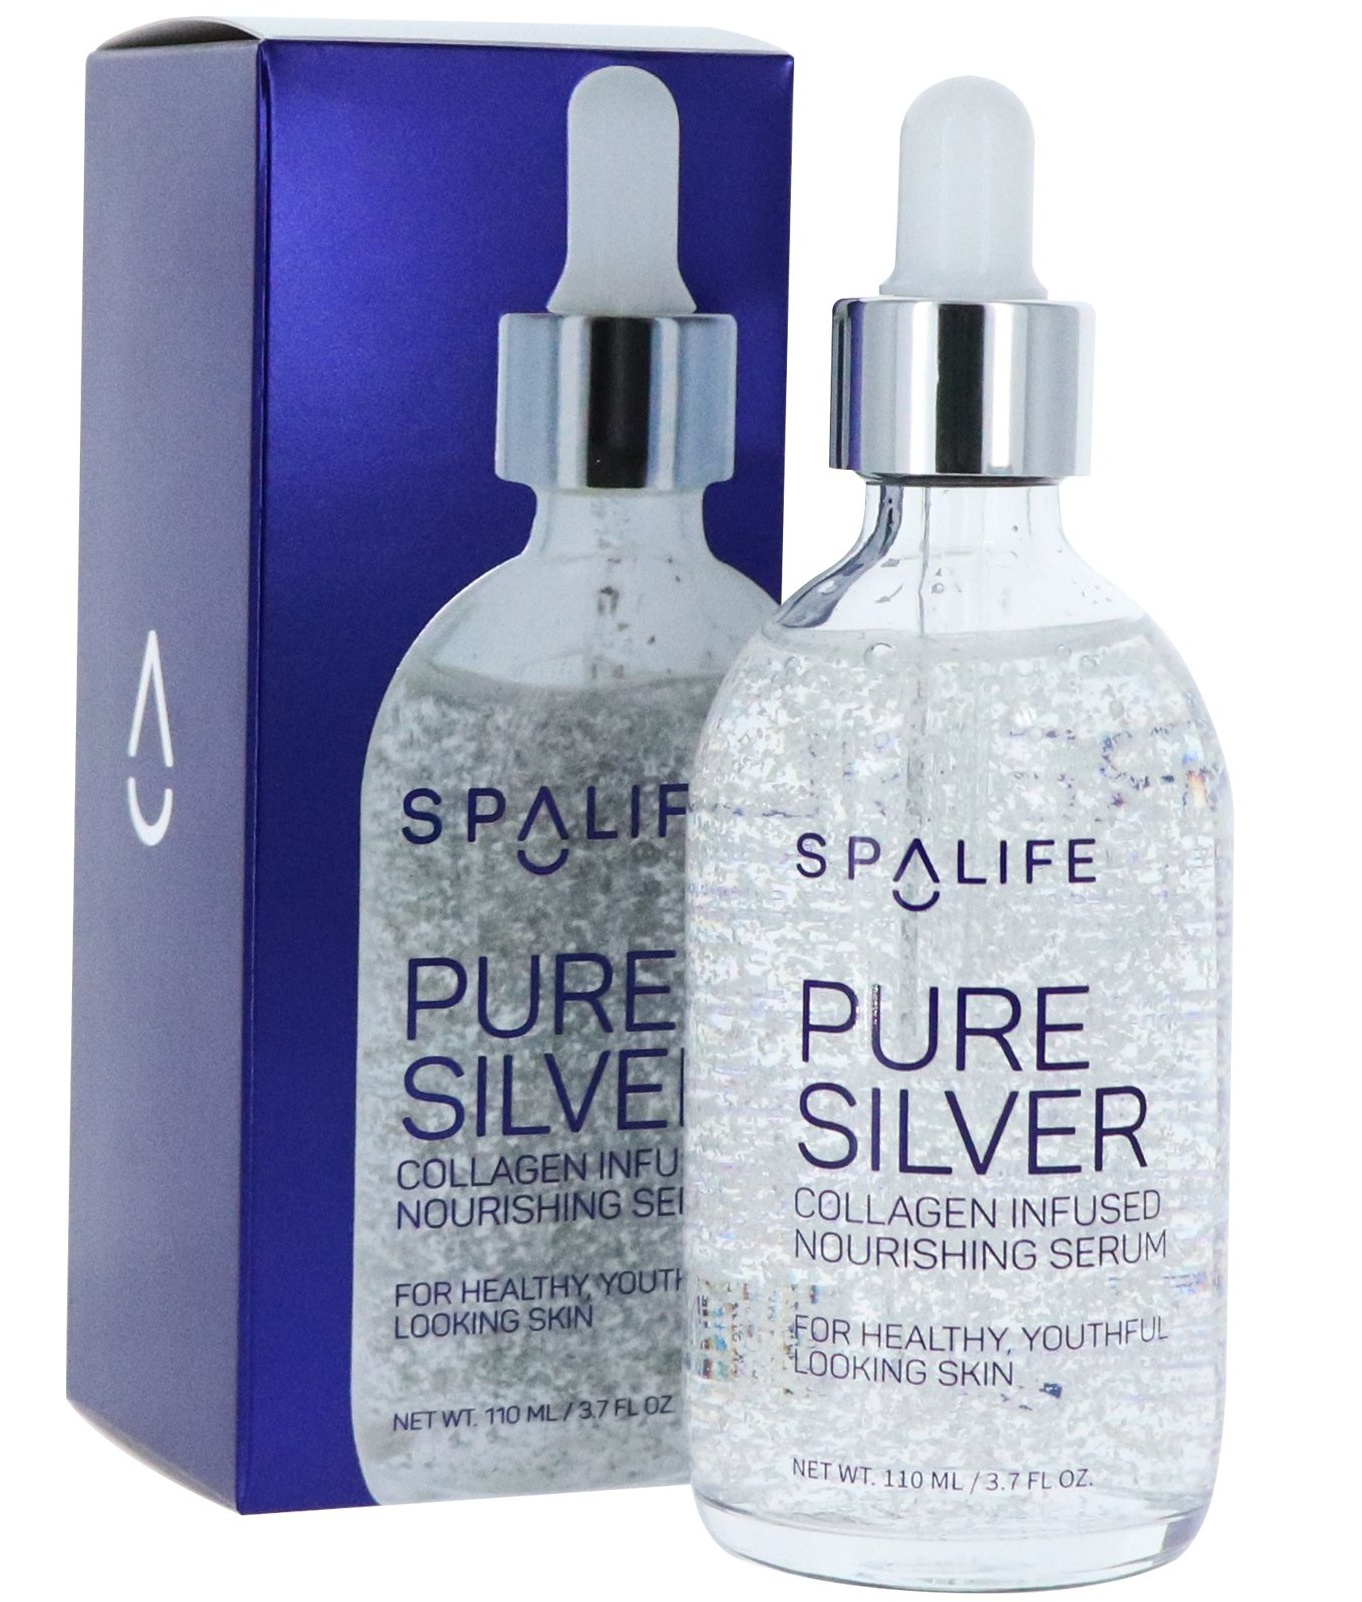 Spalife Pure Silver Collagen Infused Nourishing Serum